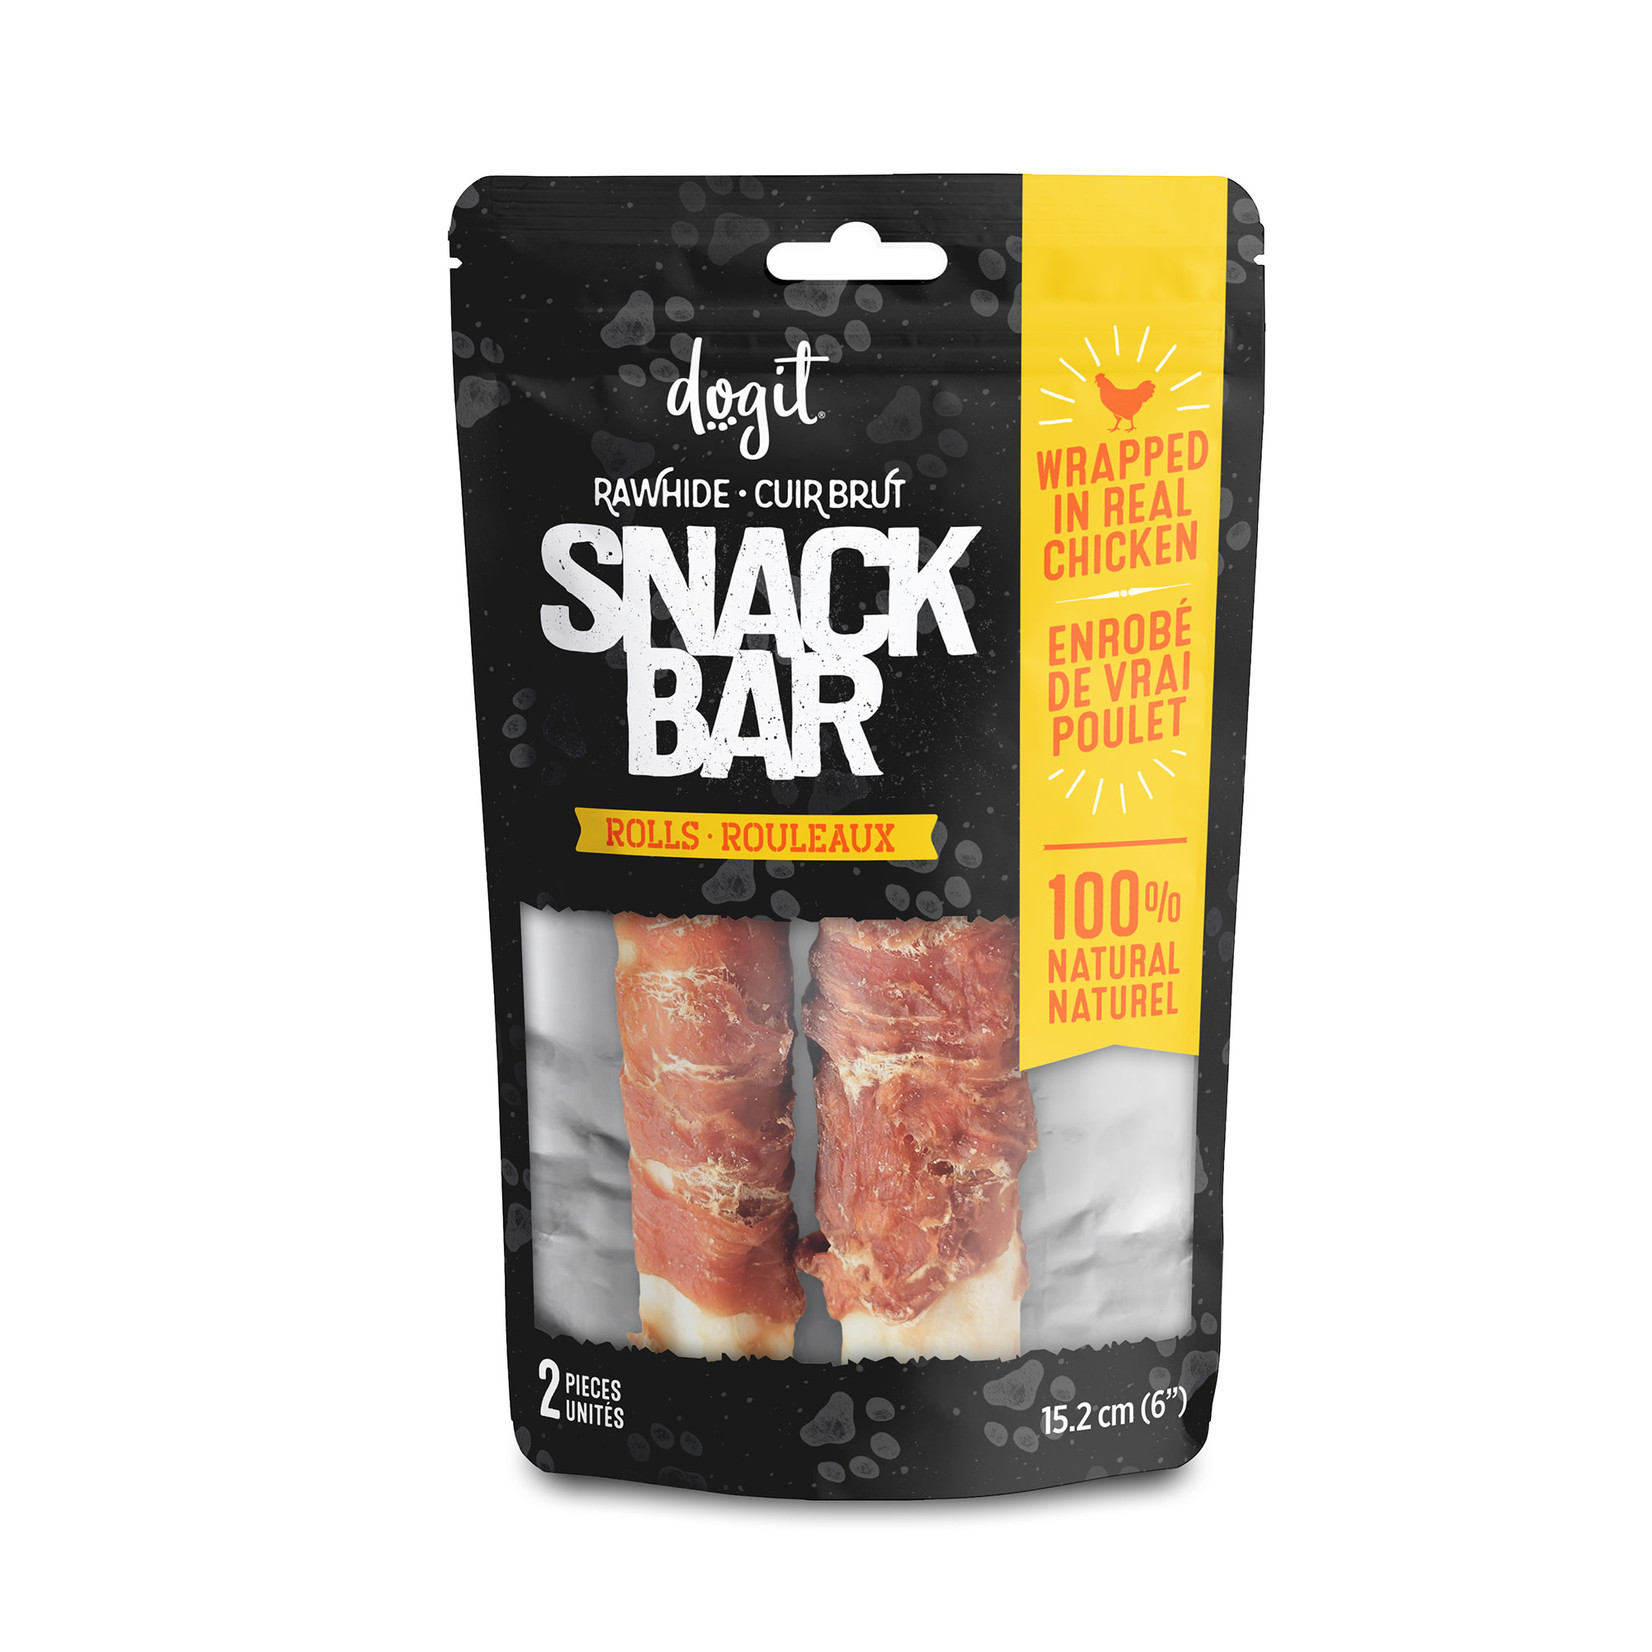 DOG IT Dogit Snack Bar Rawhide - Chicken-Wrapped Rolls - 2 pcs (15.2 cm/6 in)